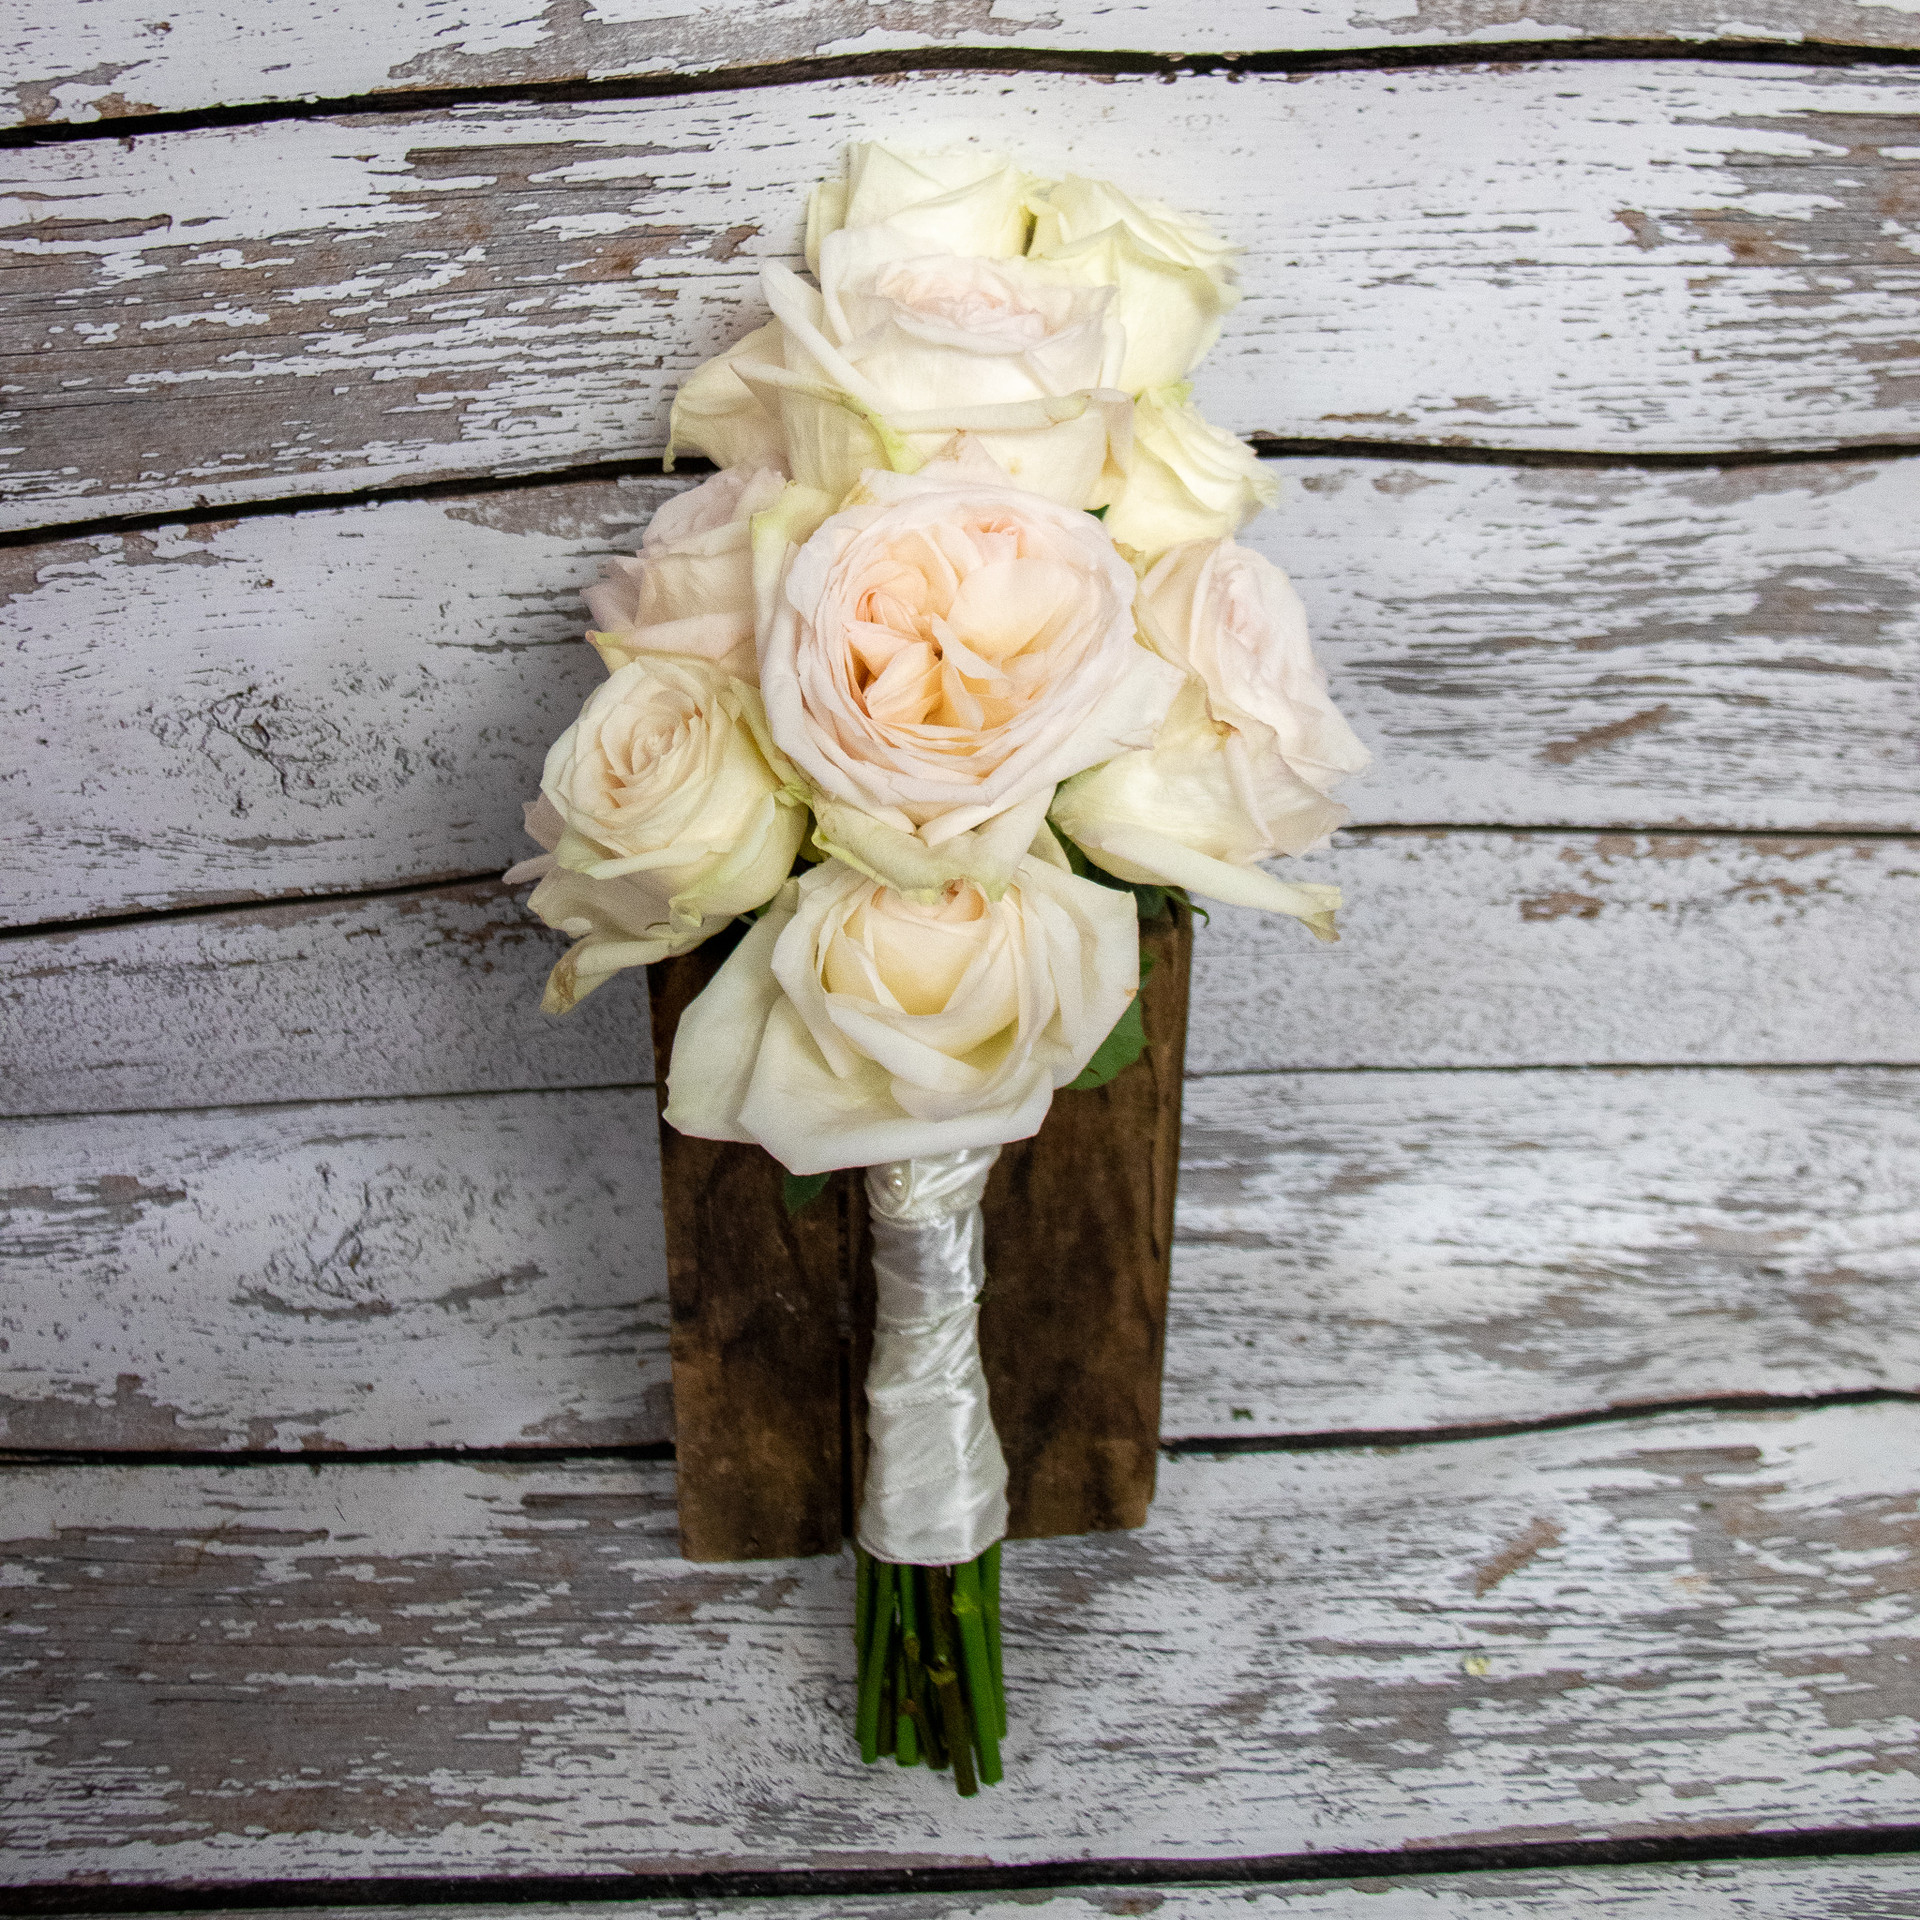 White Roses Anemone And Ivy Bridal Bouquet Loveland Wedding Florist Earles Flowers 2128